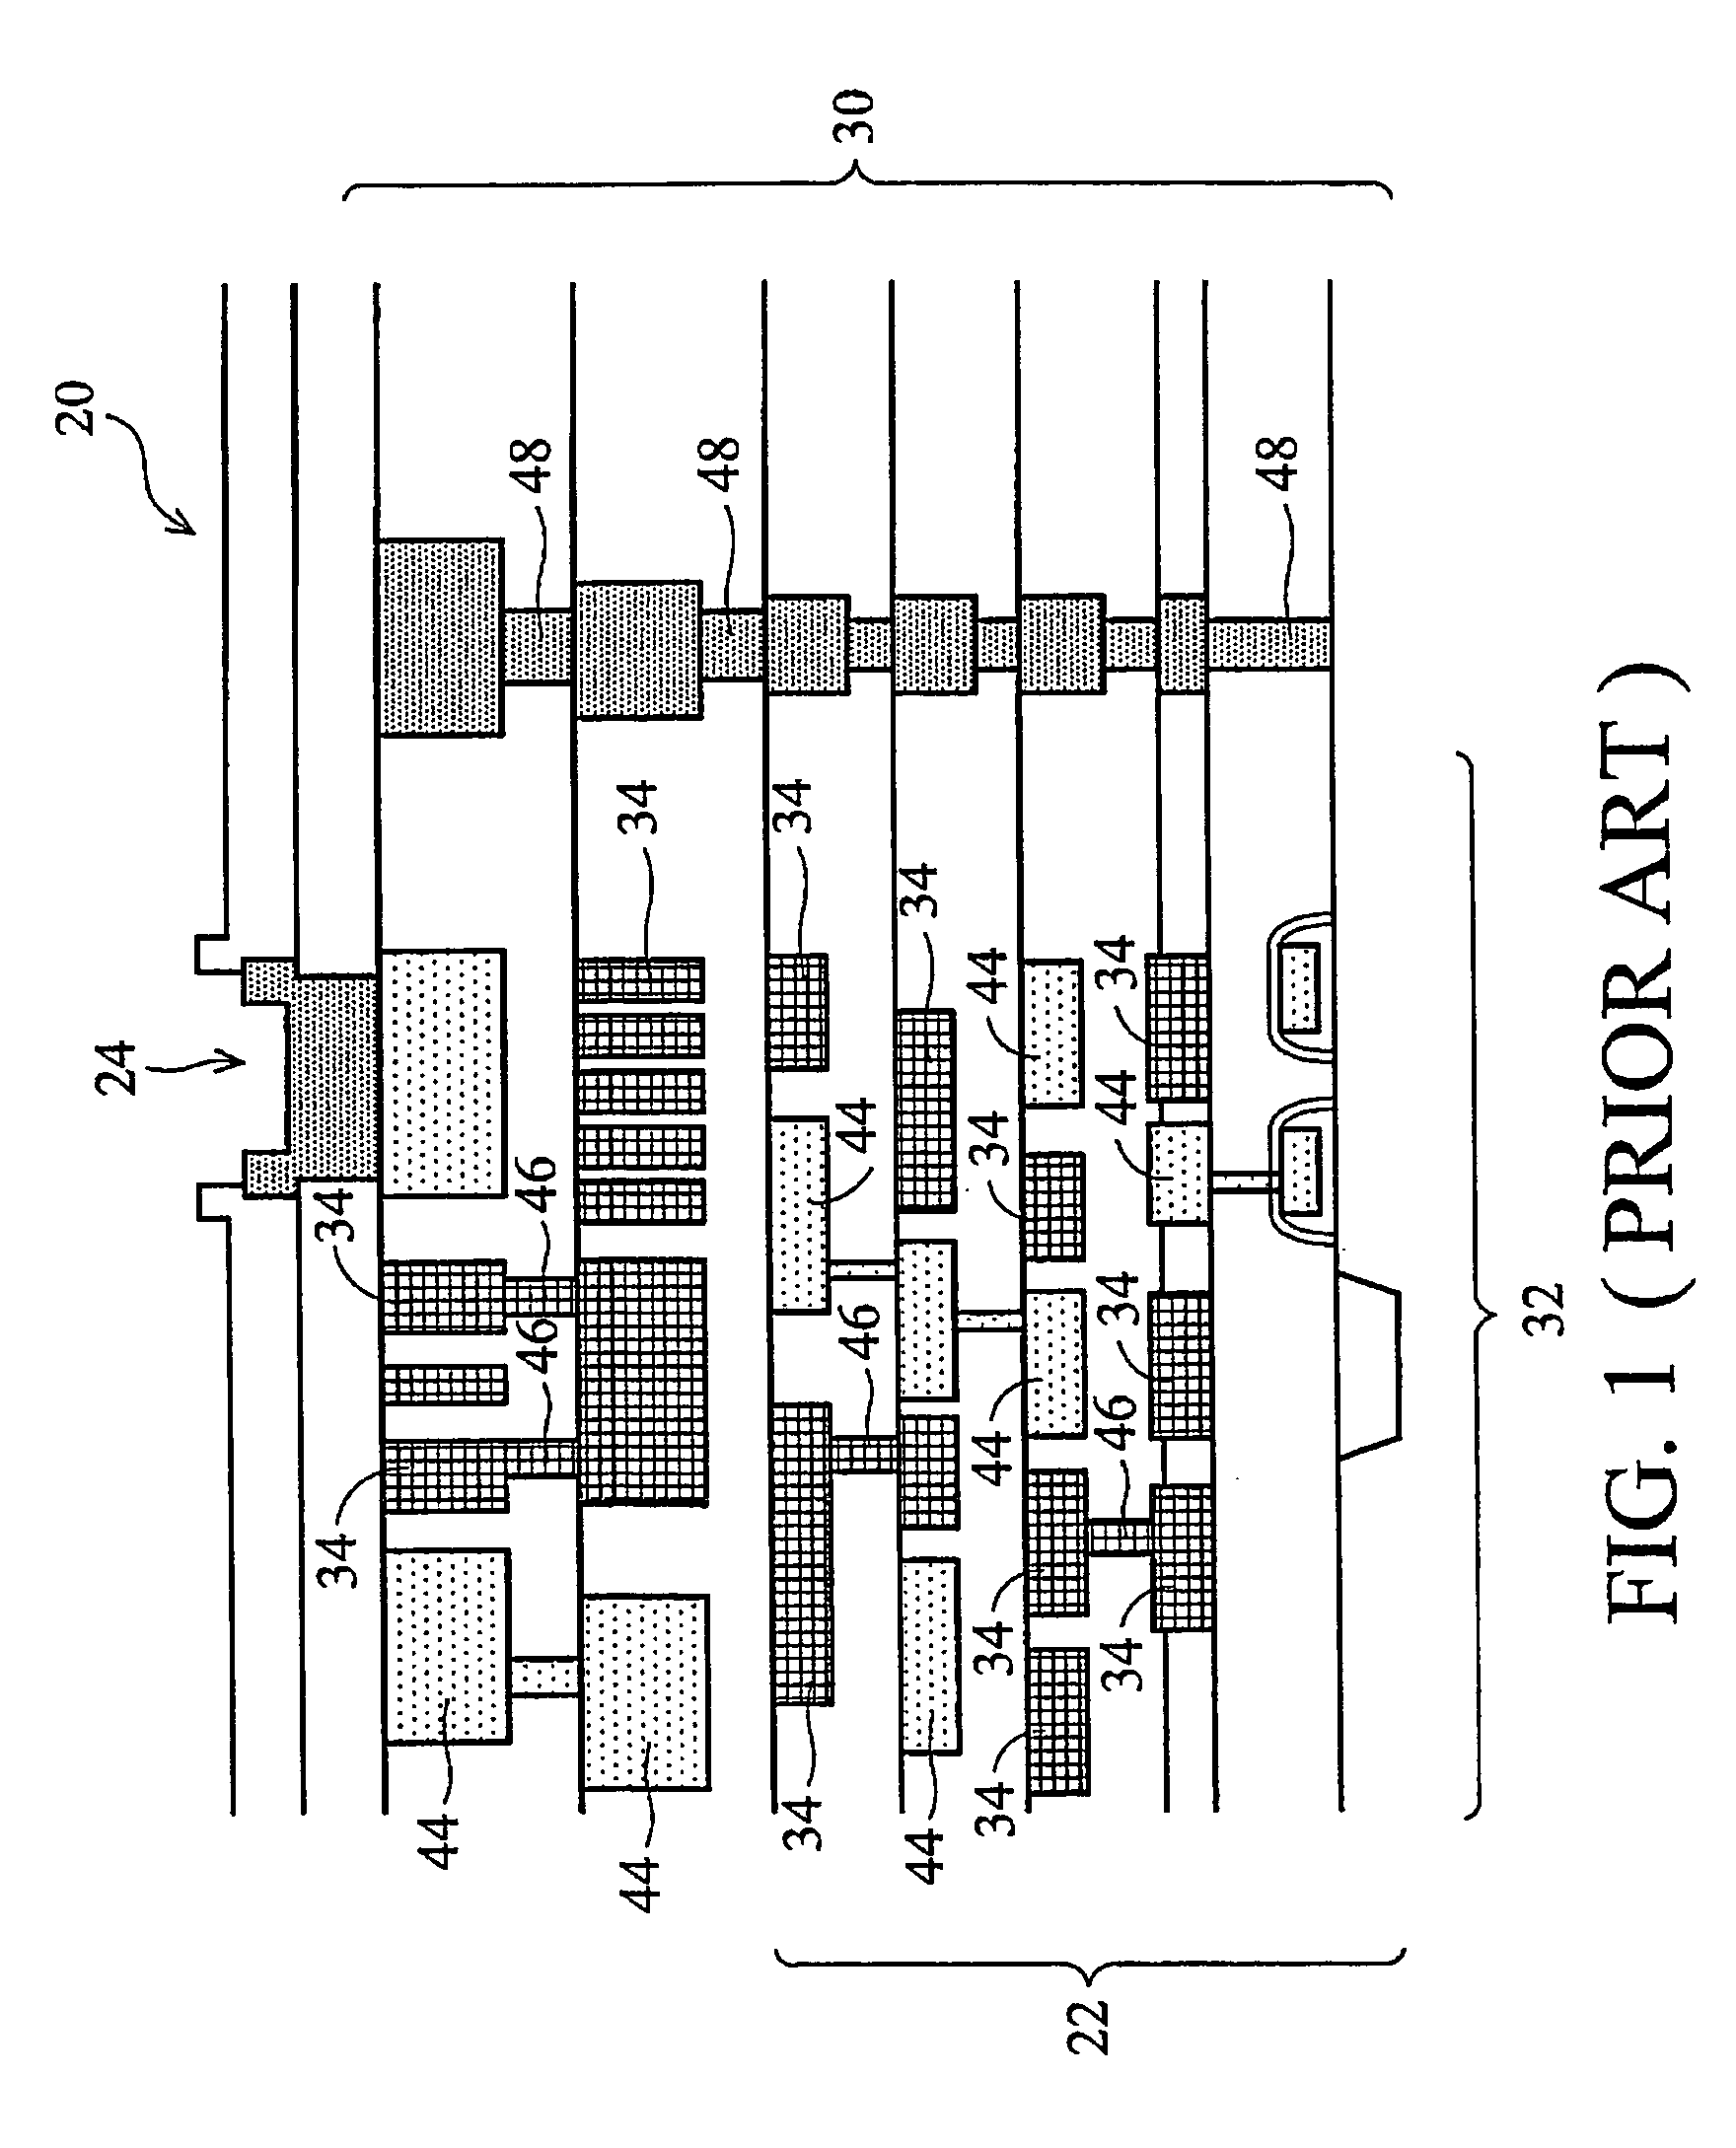 Dummy structures extending from seal ring into active circuit area of integrated circuit chip